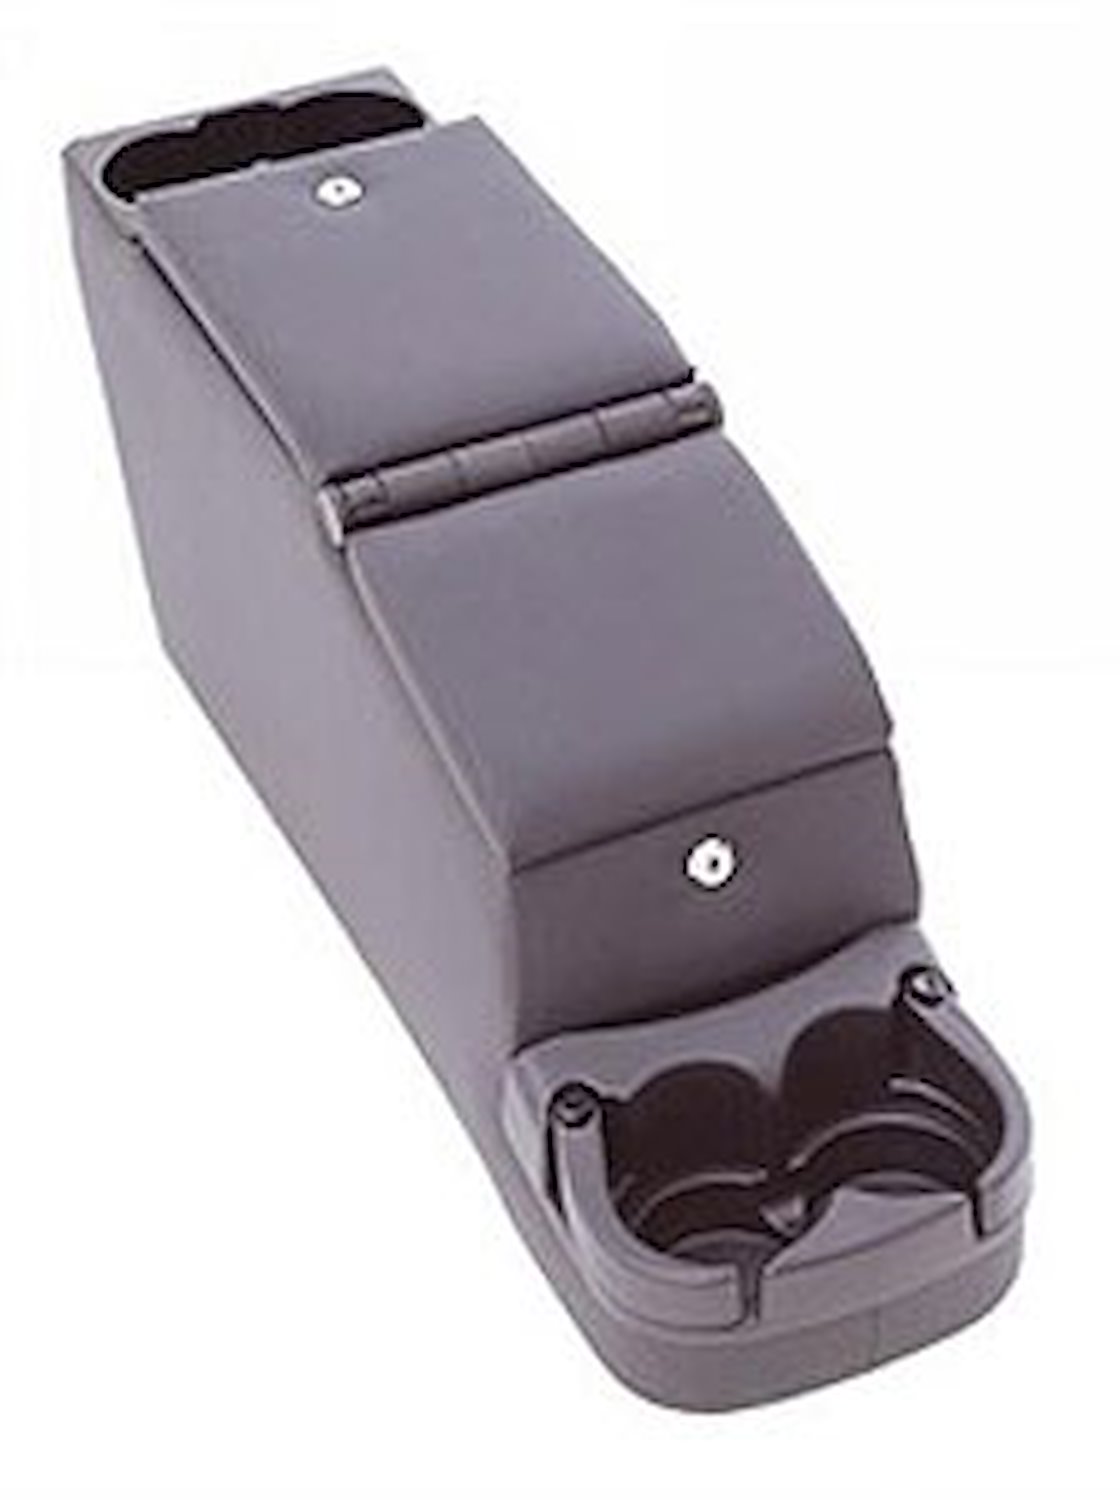 Deluxe Jeep Locking Center Console fits Jeep CJ and Wrangler YJ Grey